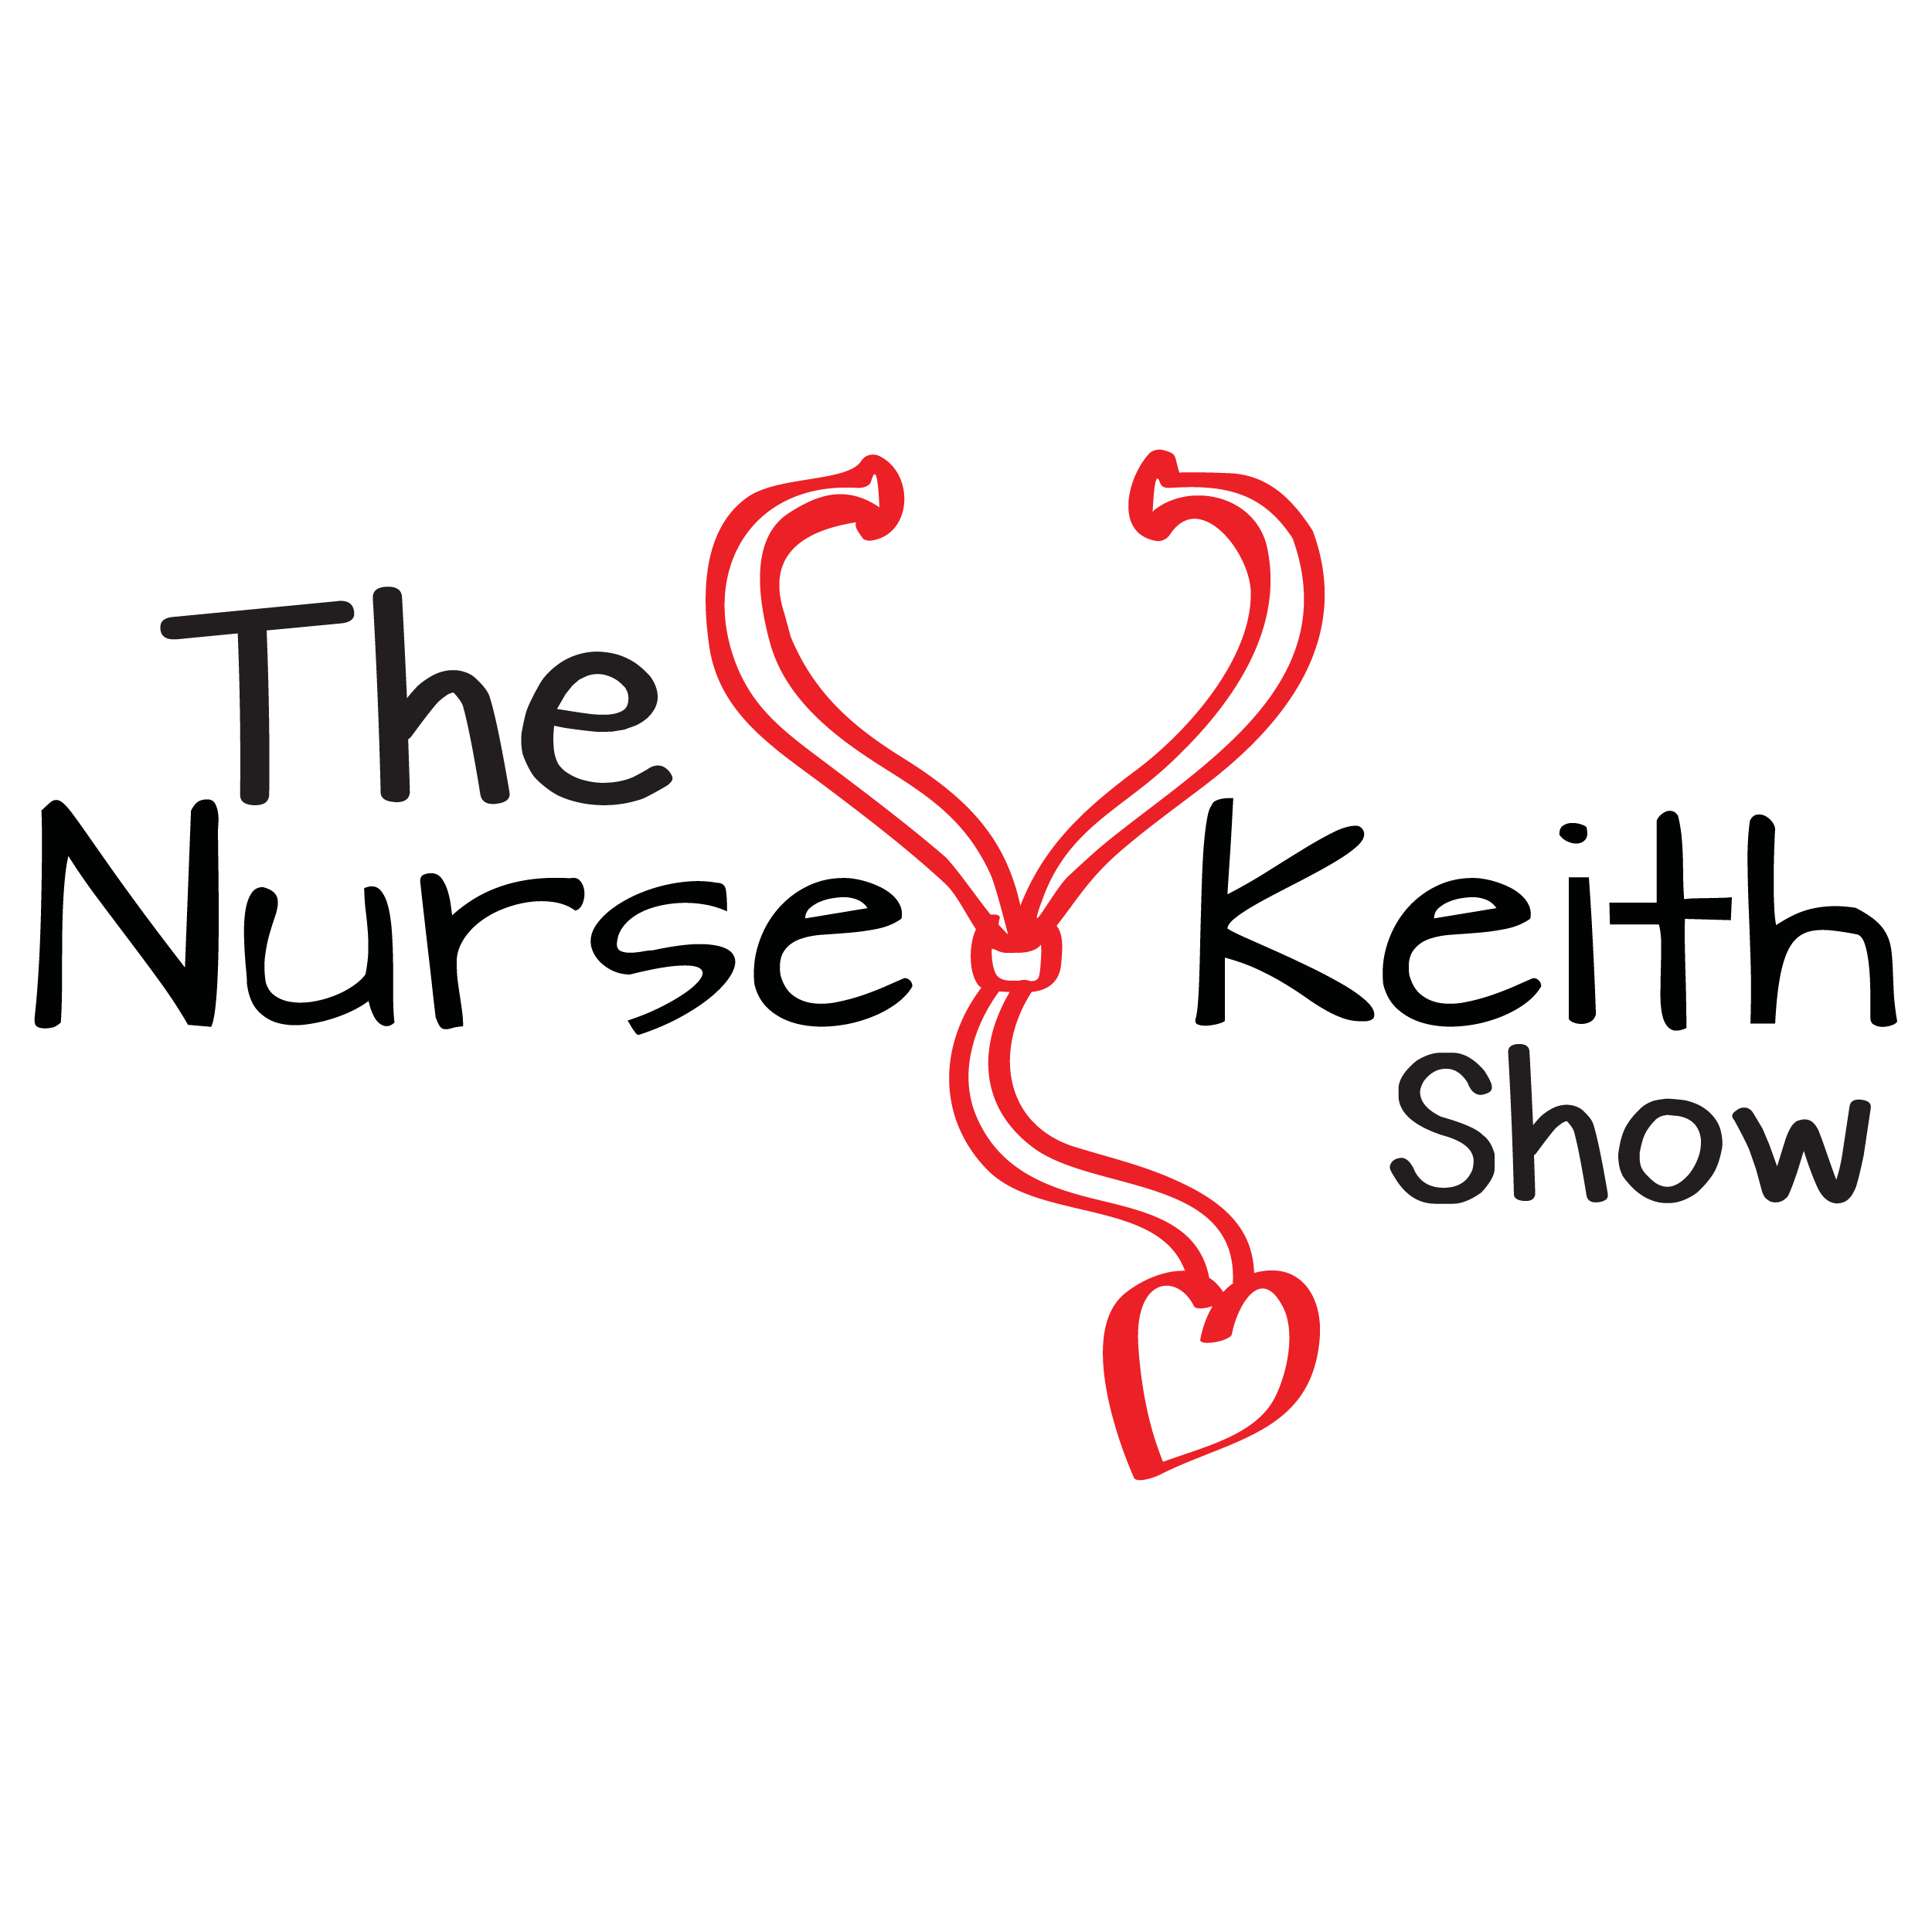 Overcoming Nursing Career Attention Deficit Disorder | The Nurse Keith Show, EPS 336